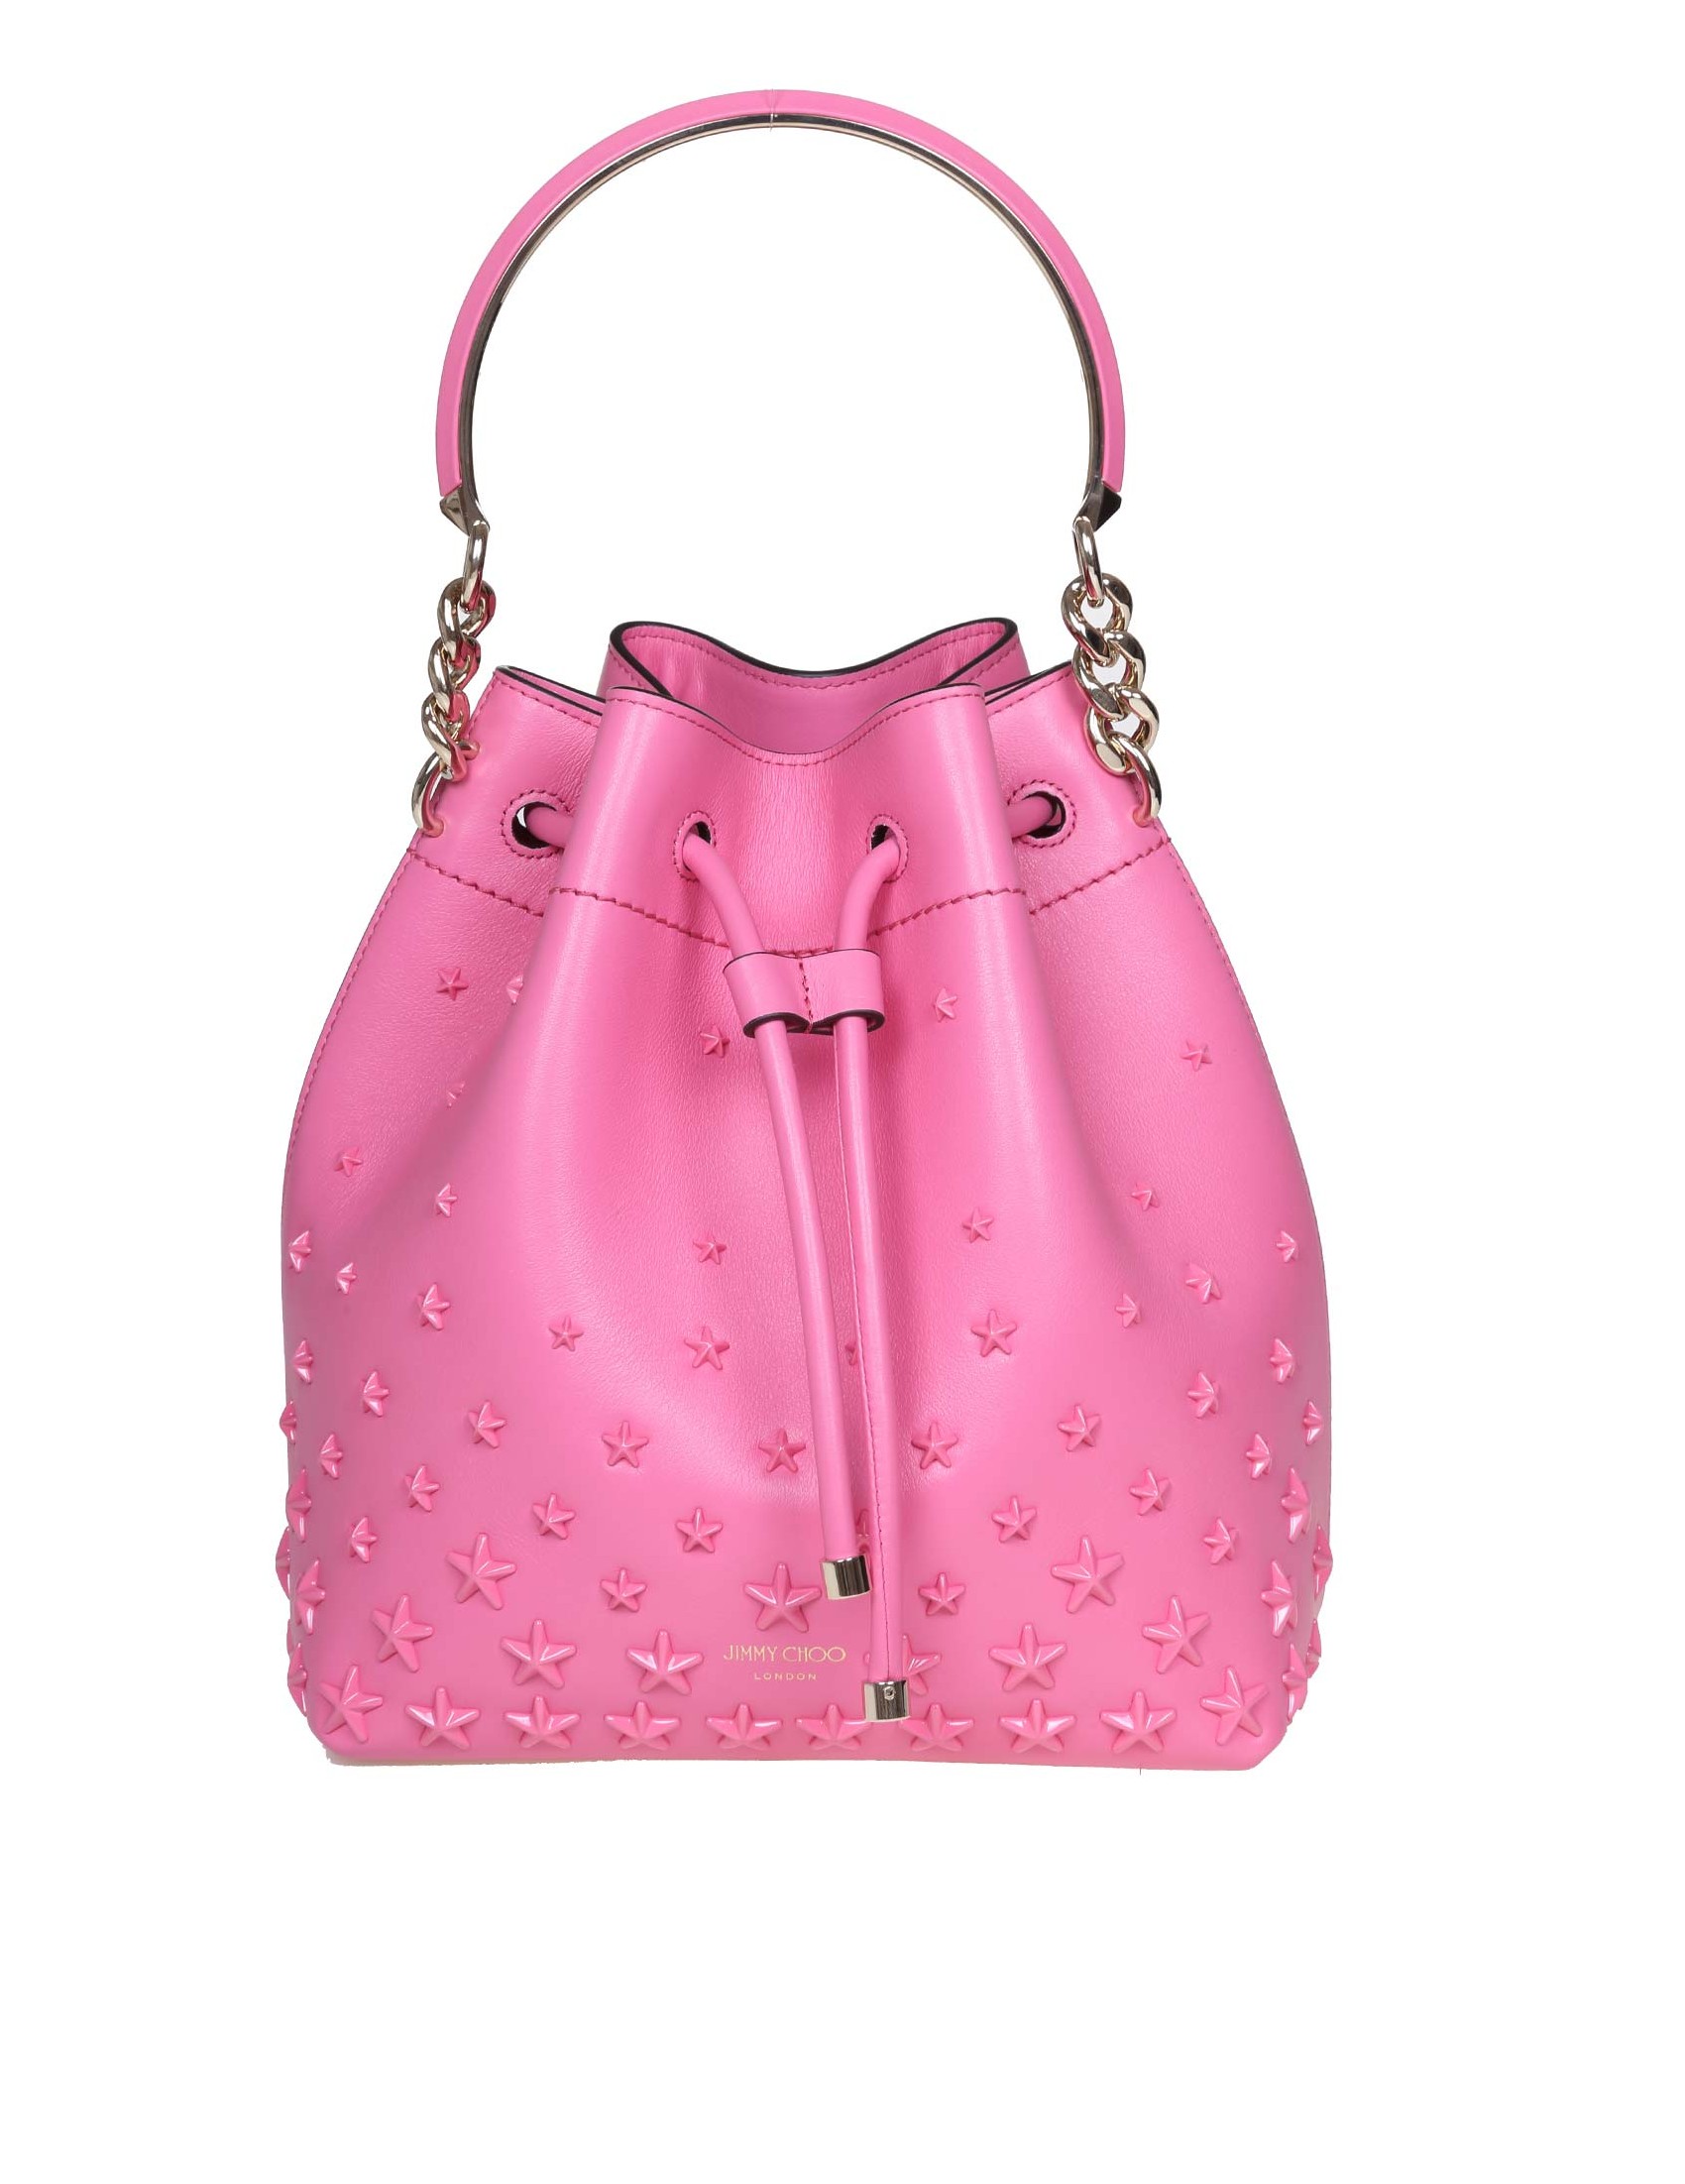 JIMMY CHOO PINK LEATHER BUCKET BAG WITH STUDS